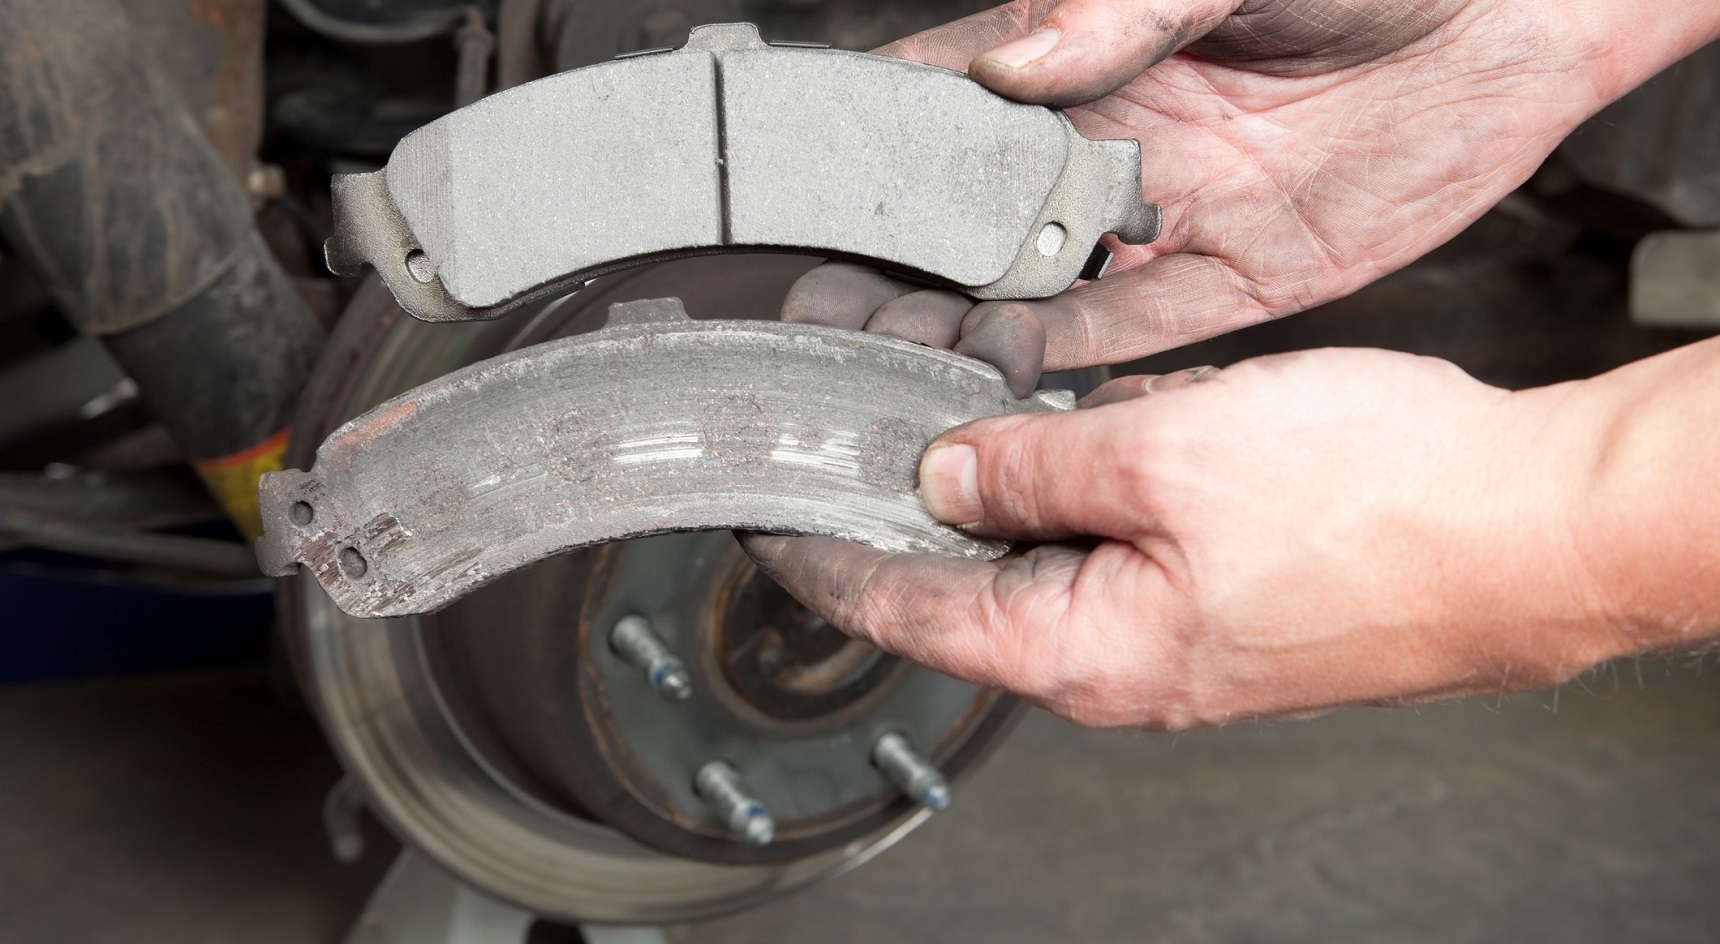 It’s essential your car’s braking system is fully functioning.